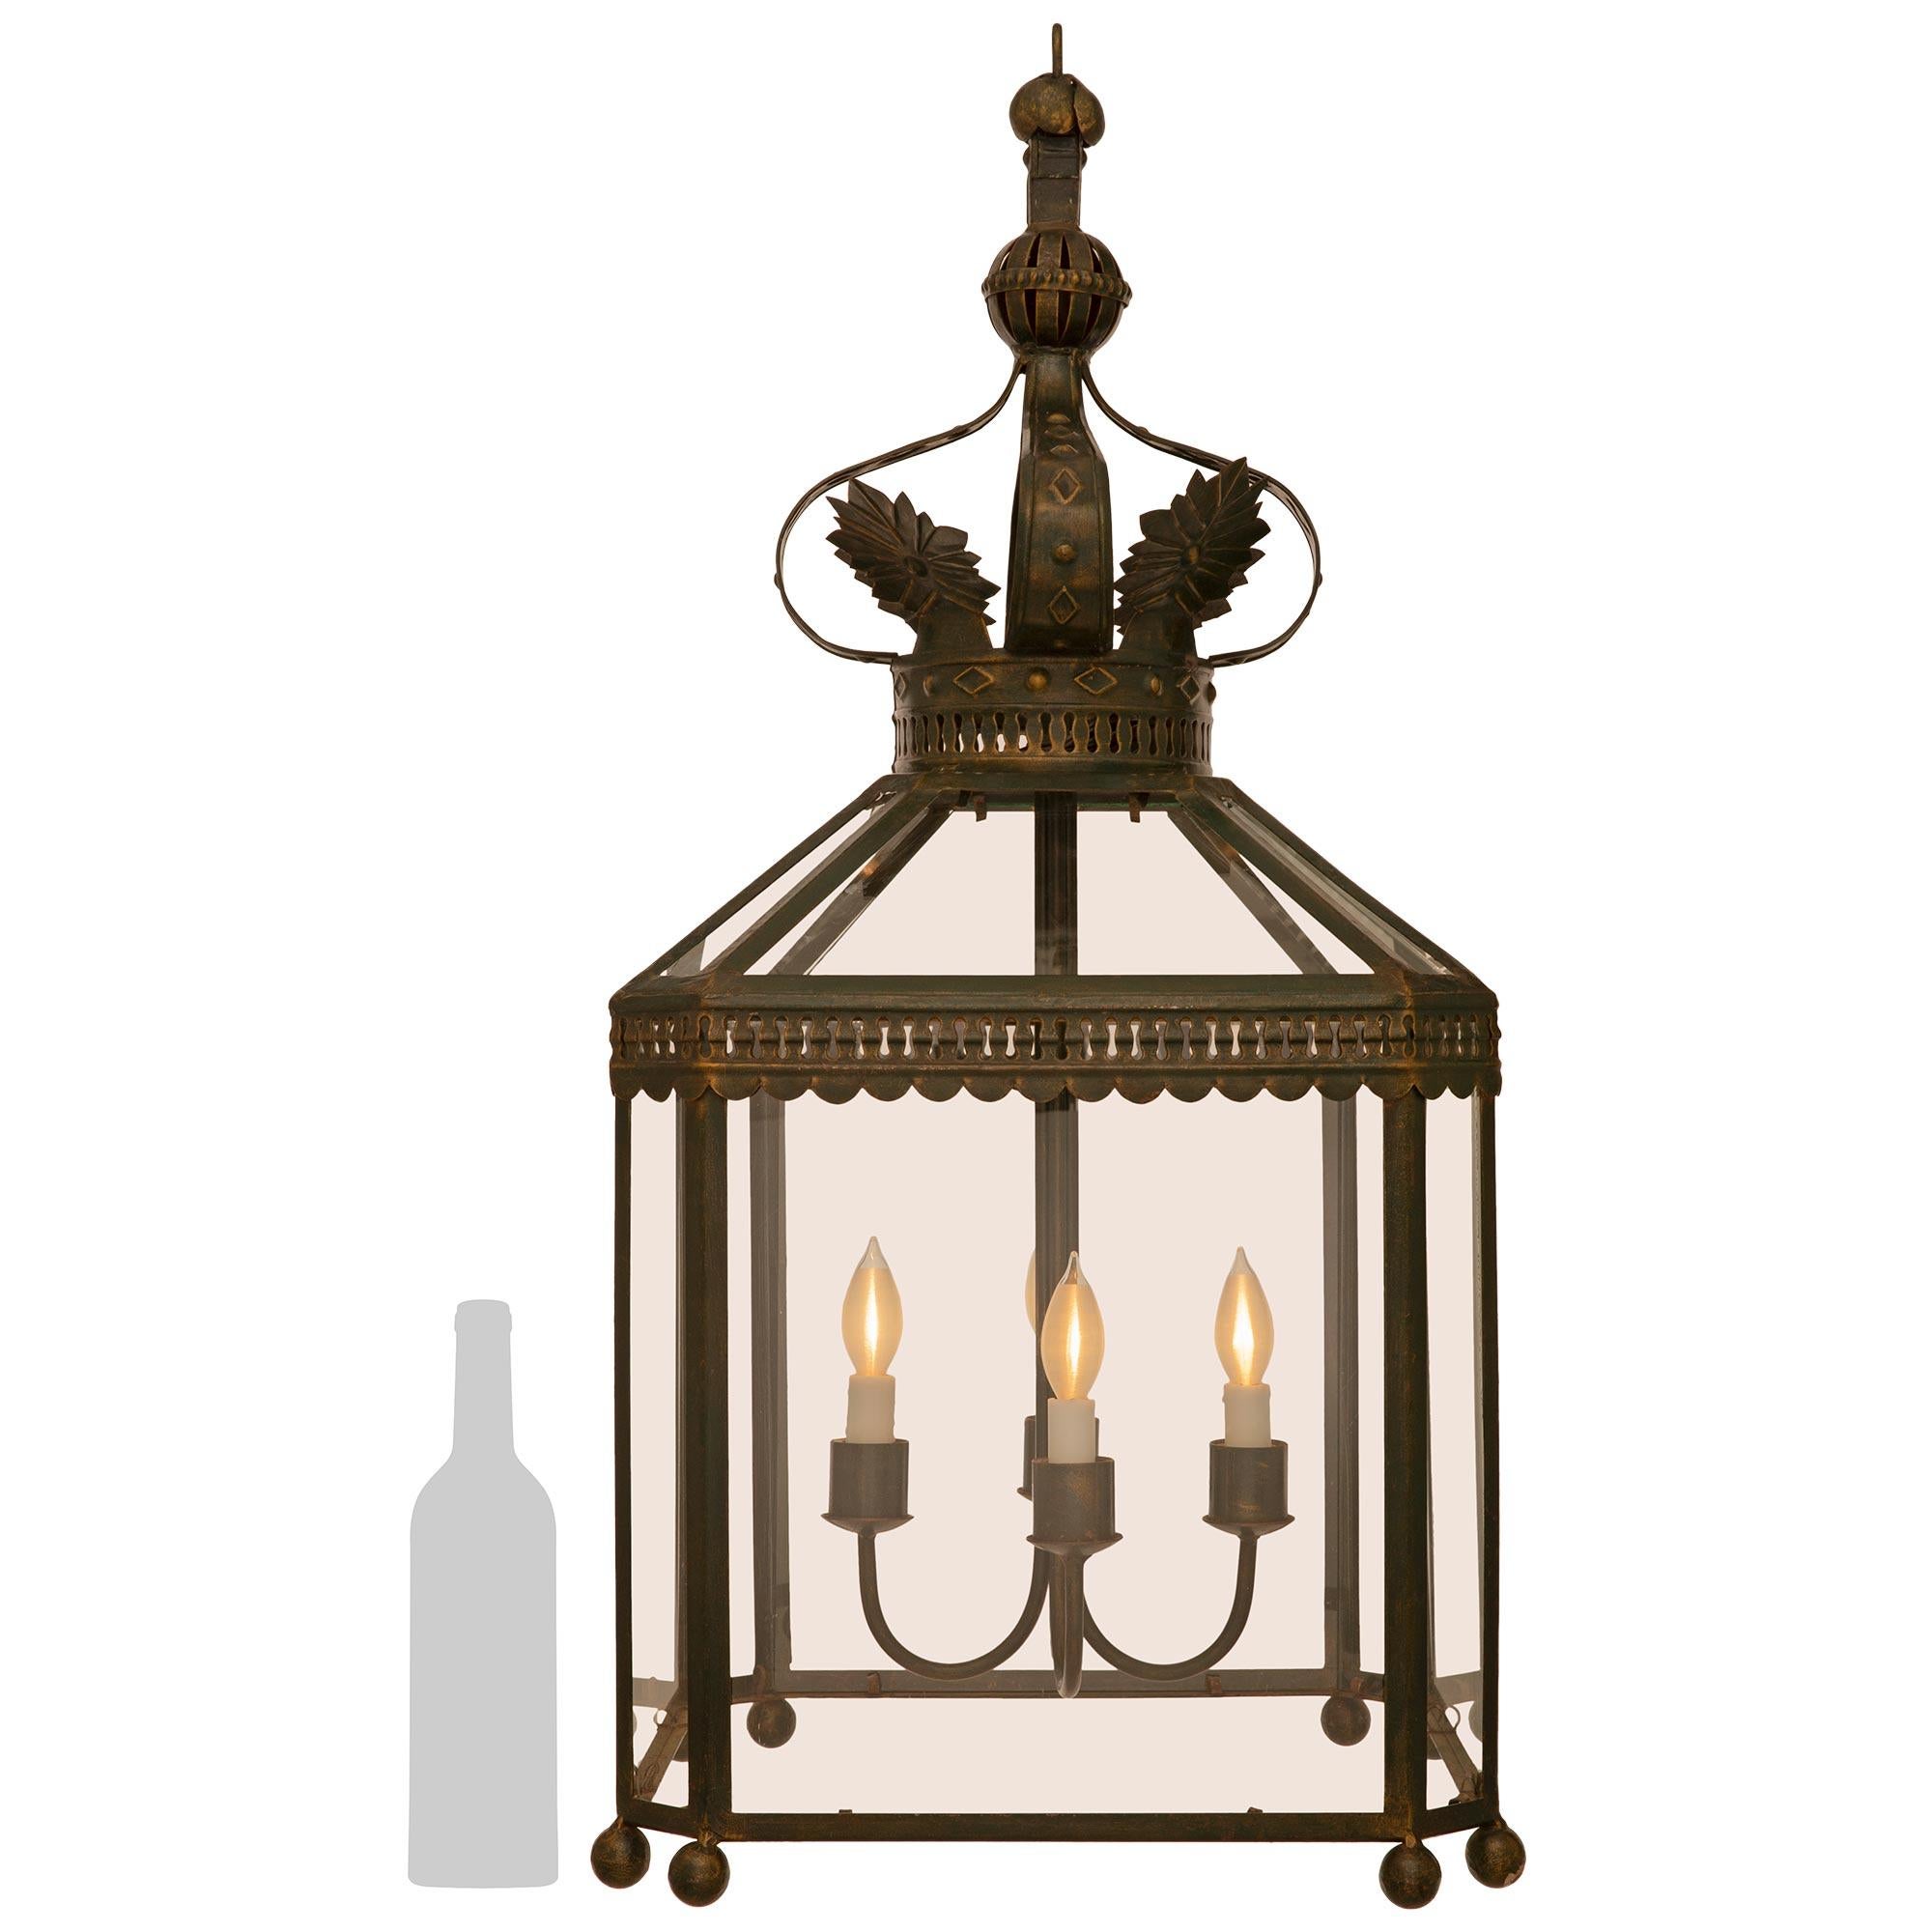 A handsome and most decorative French Turn of the Century Louis XVI st. Wrought Iron lantern. The octagonal four arm four light lantern consist of an eight sided cage with bottom spheres below each corner. Along the top edge is a scalloped Iron band